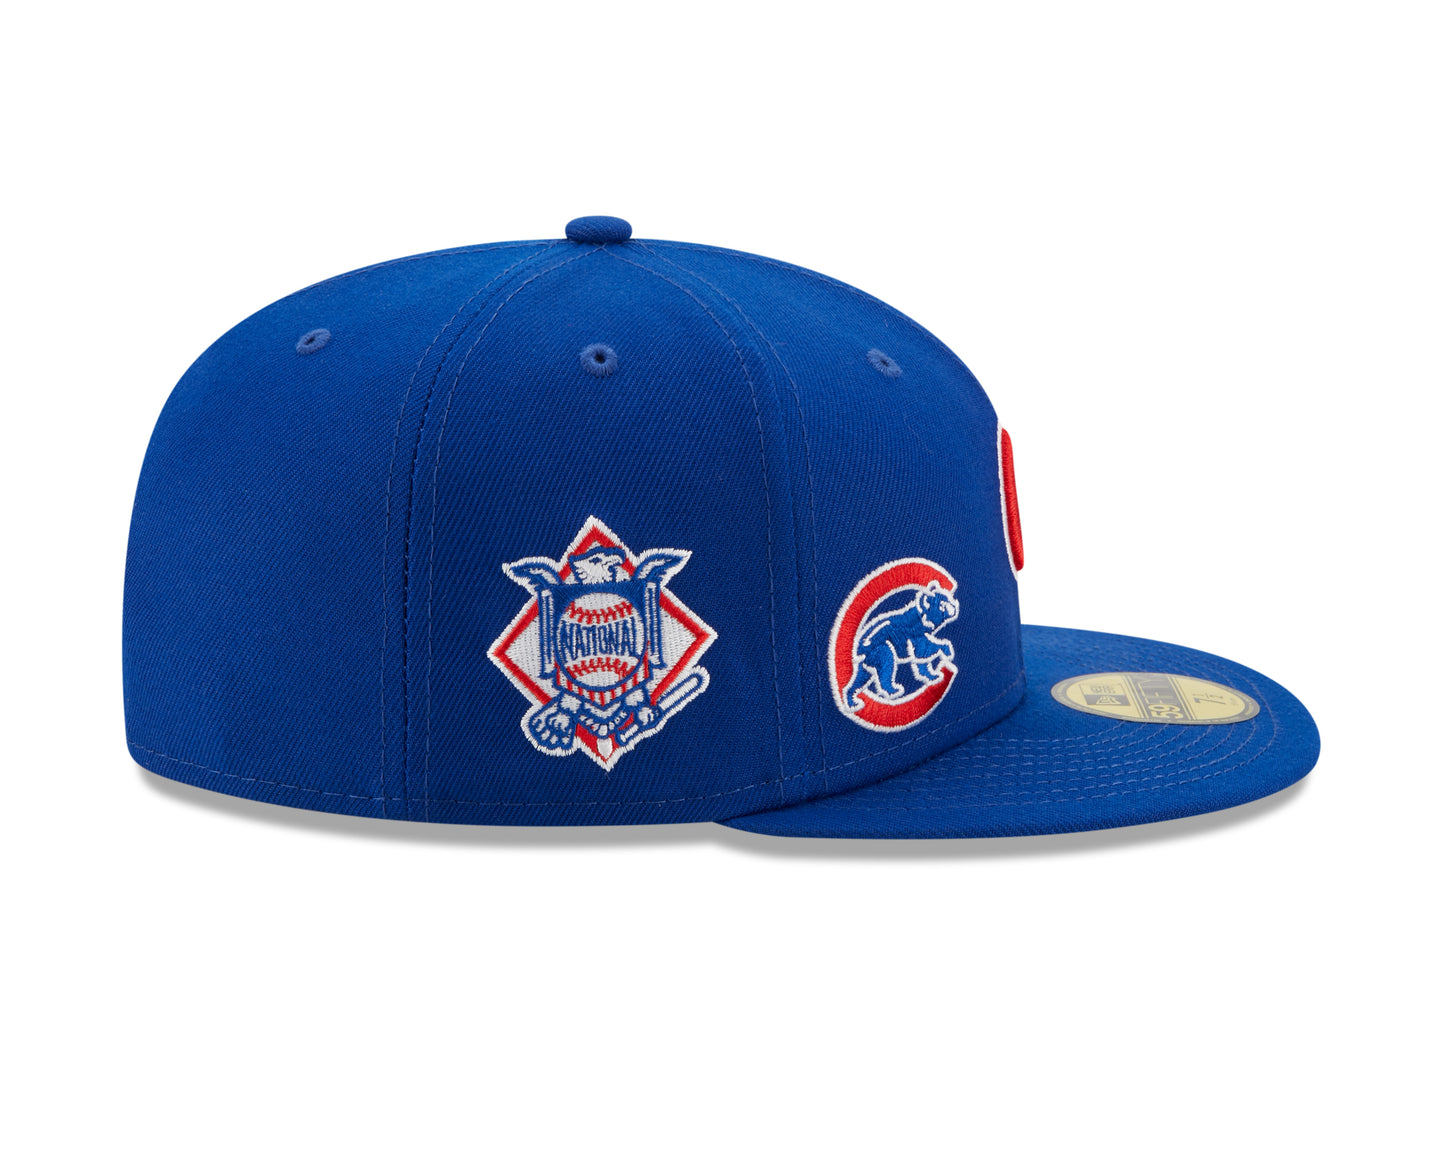 Chicago Cubs New Era Royal Blue Multi Patch 59FIFTY Fitted Hat